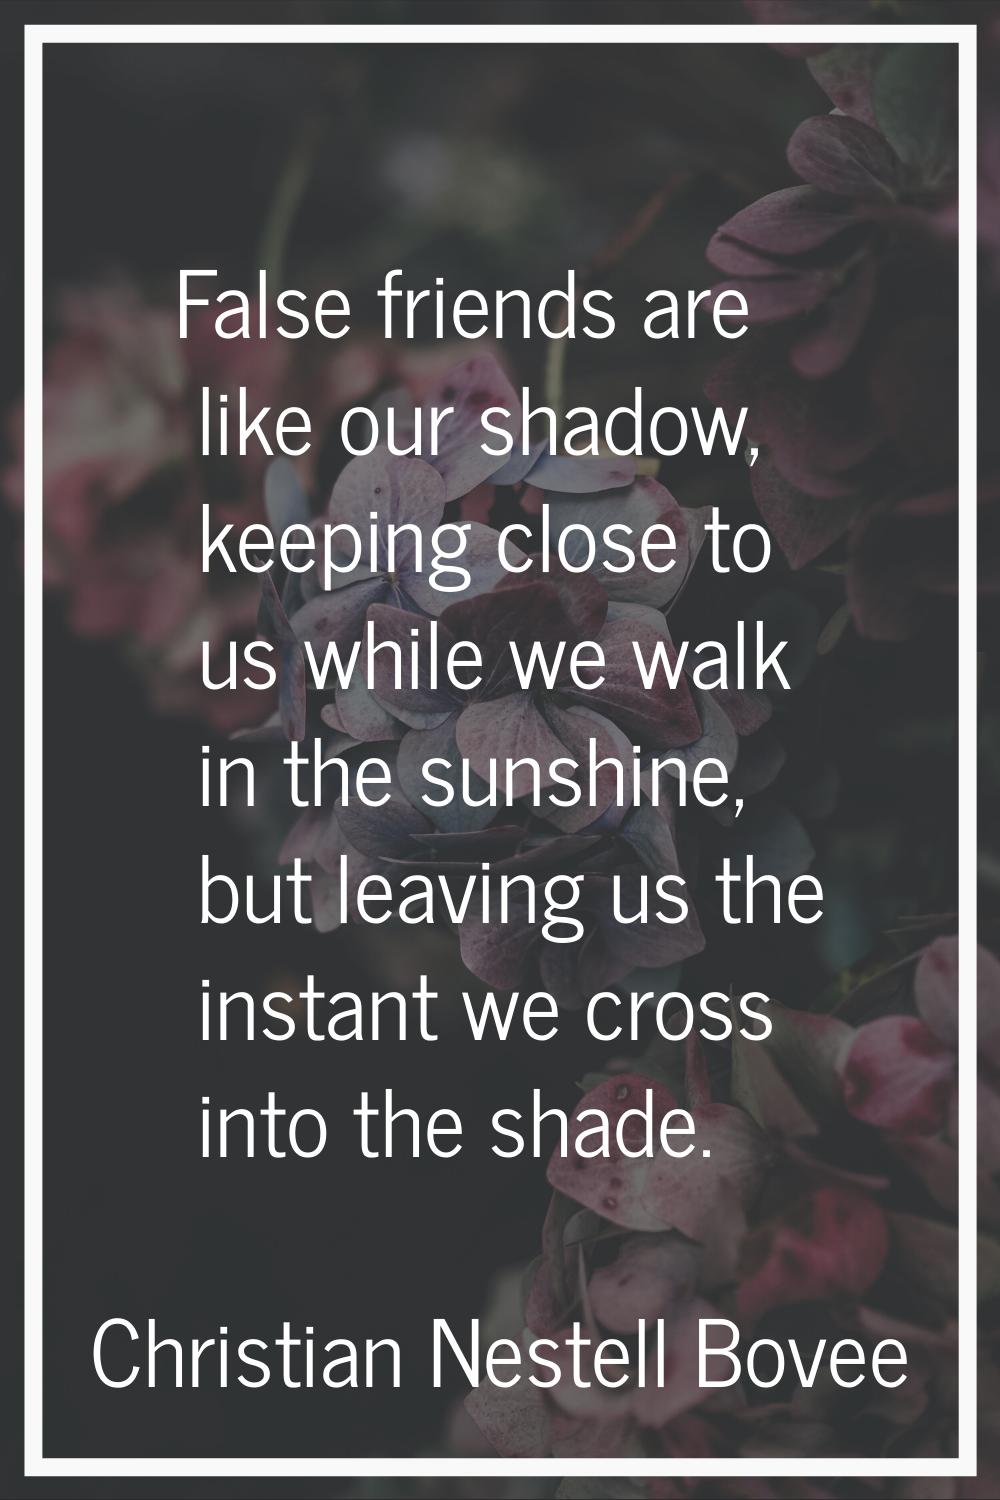 False friends are like our shadow, keeping close to us while we walk in the sunshine, but leaving u